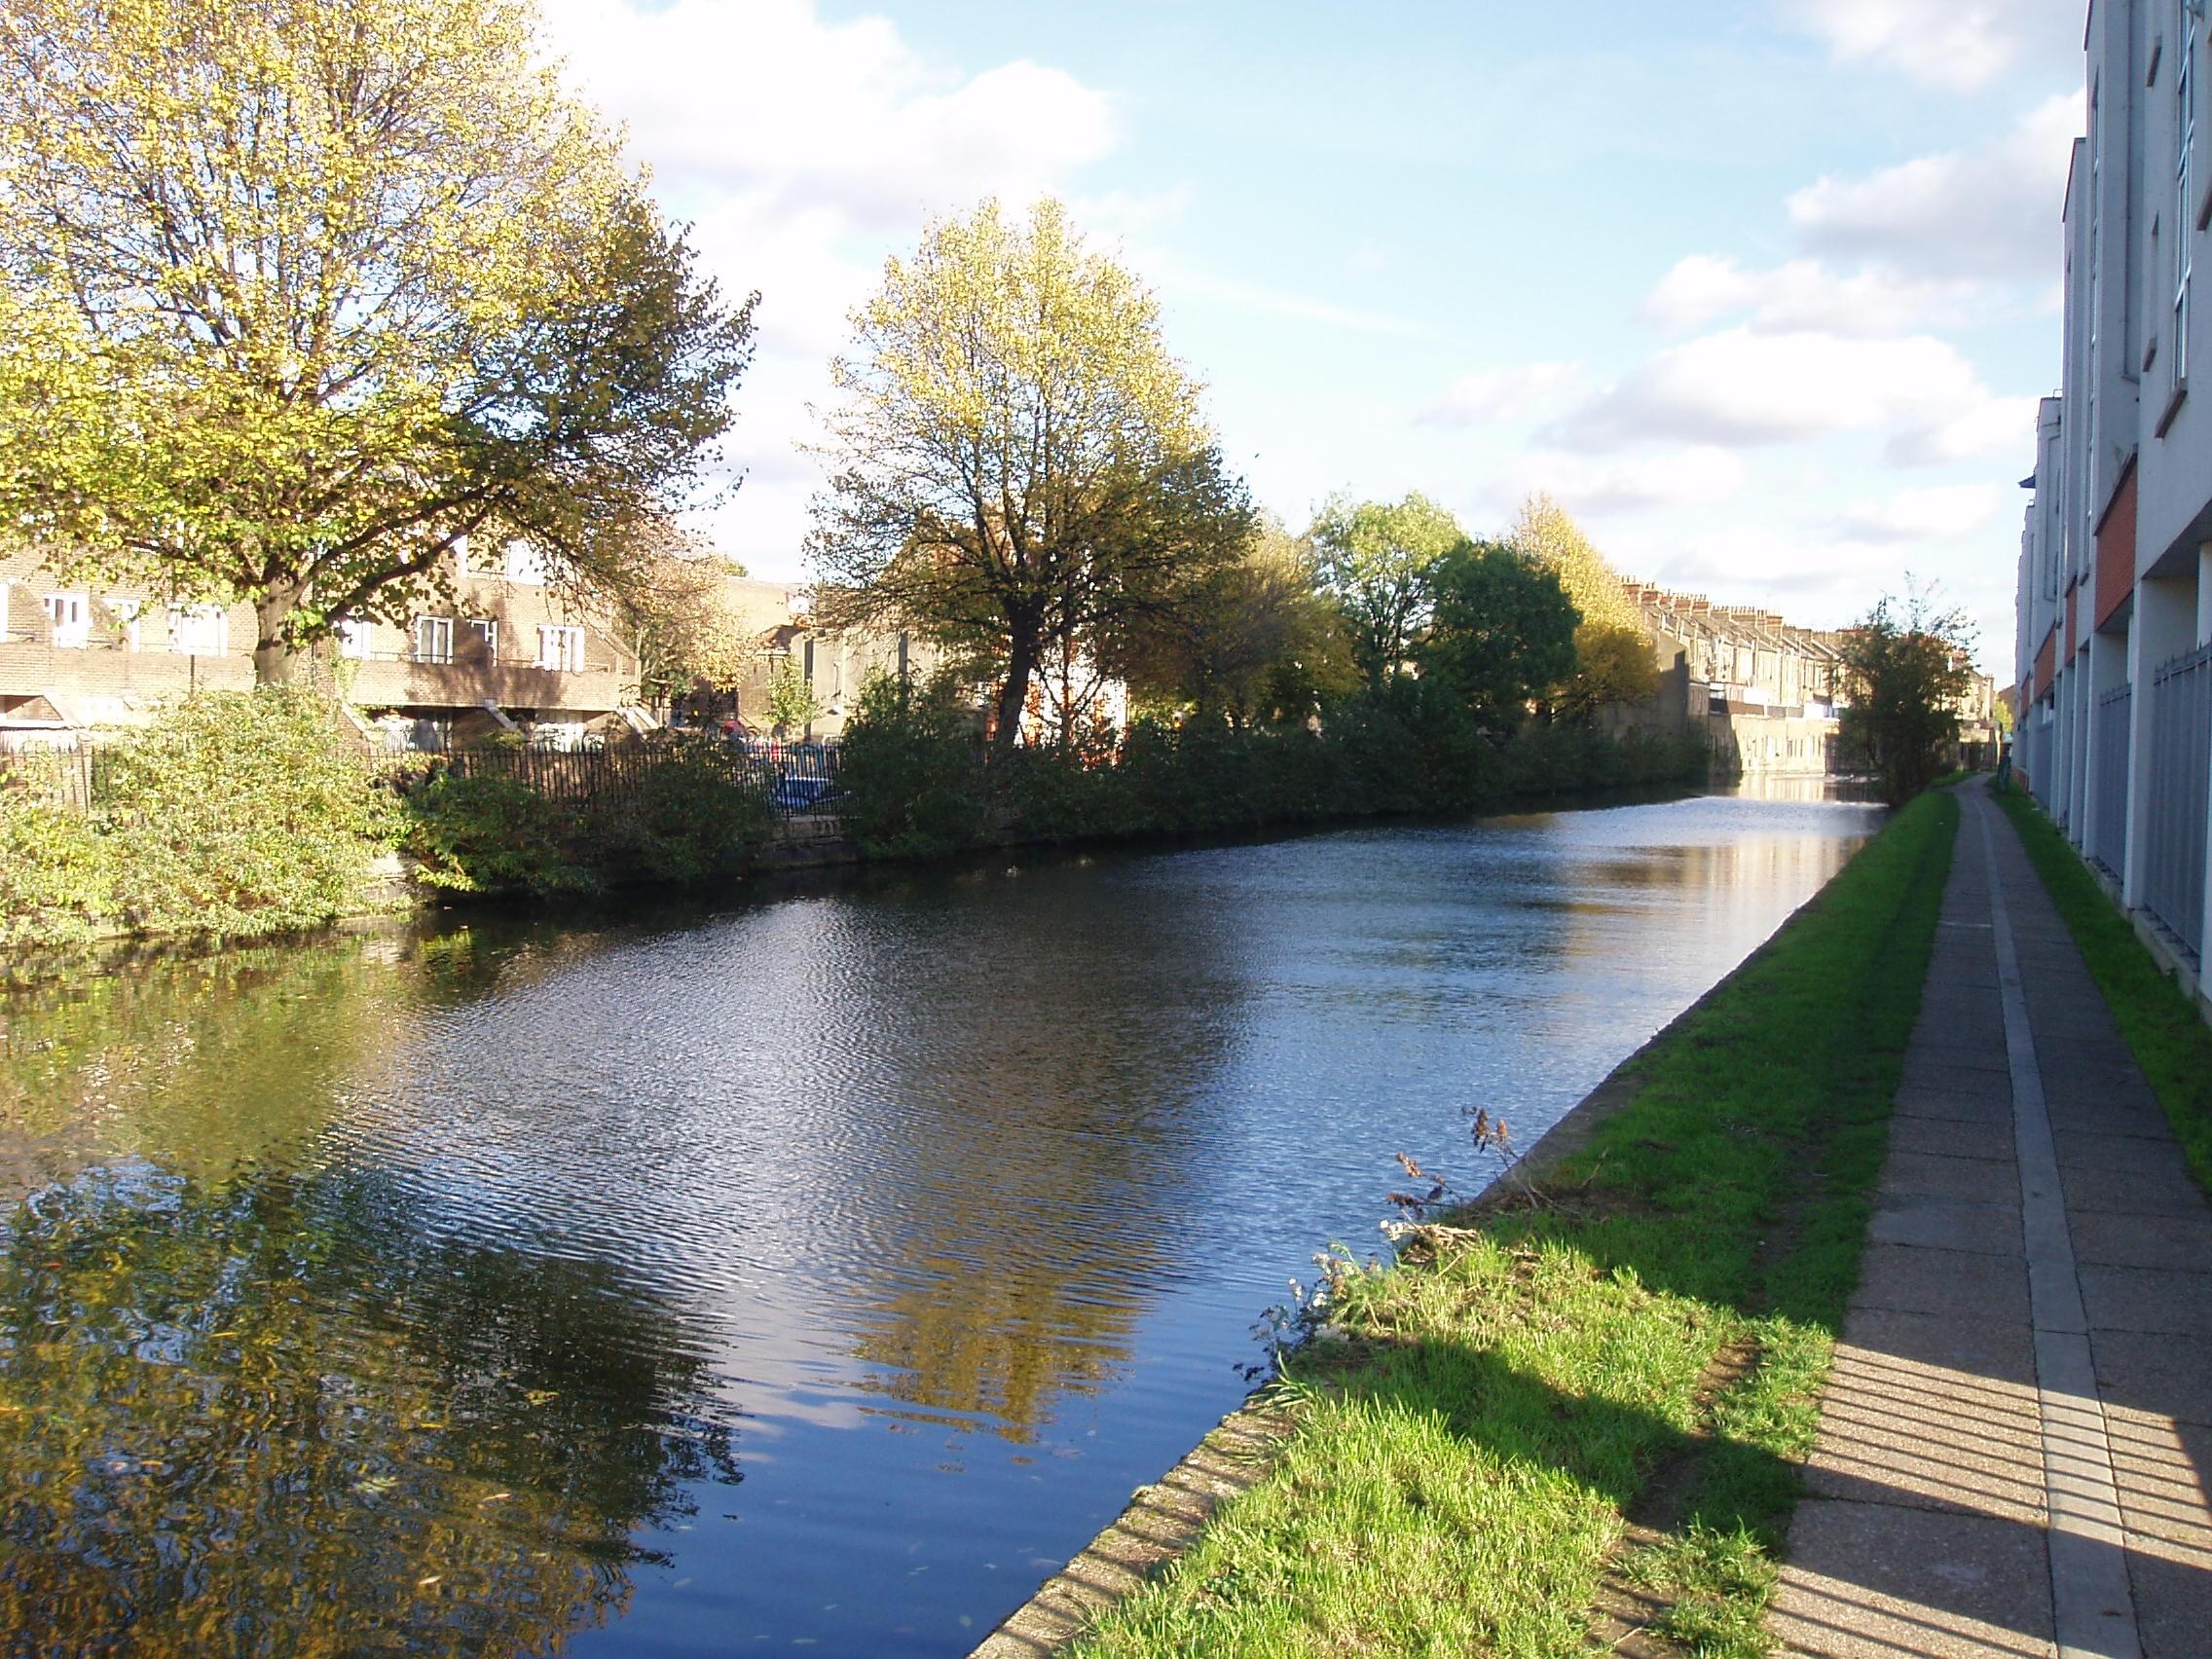 Grand Union Canal Overview